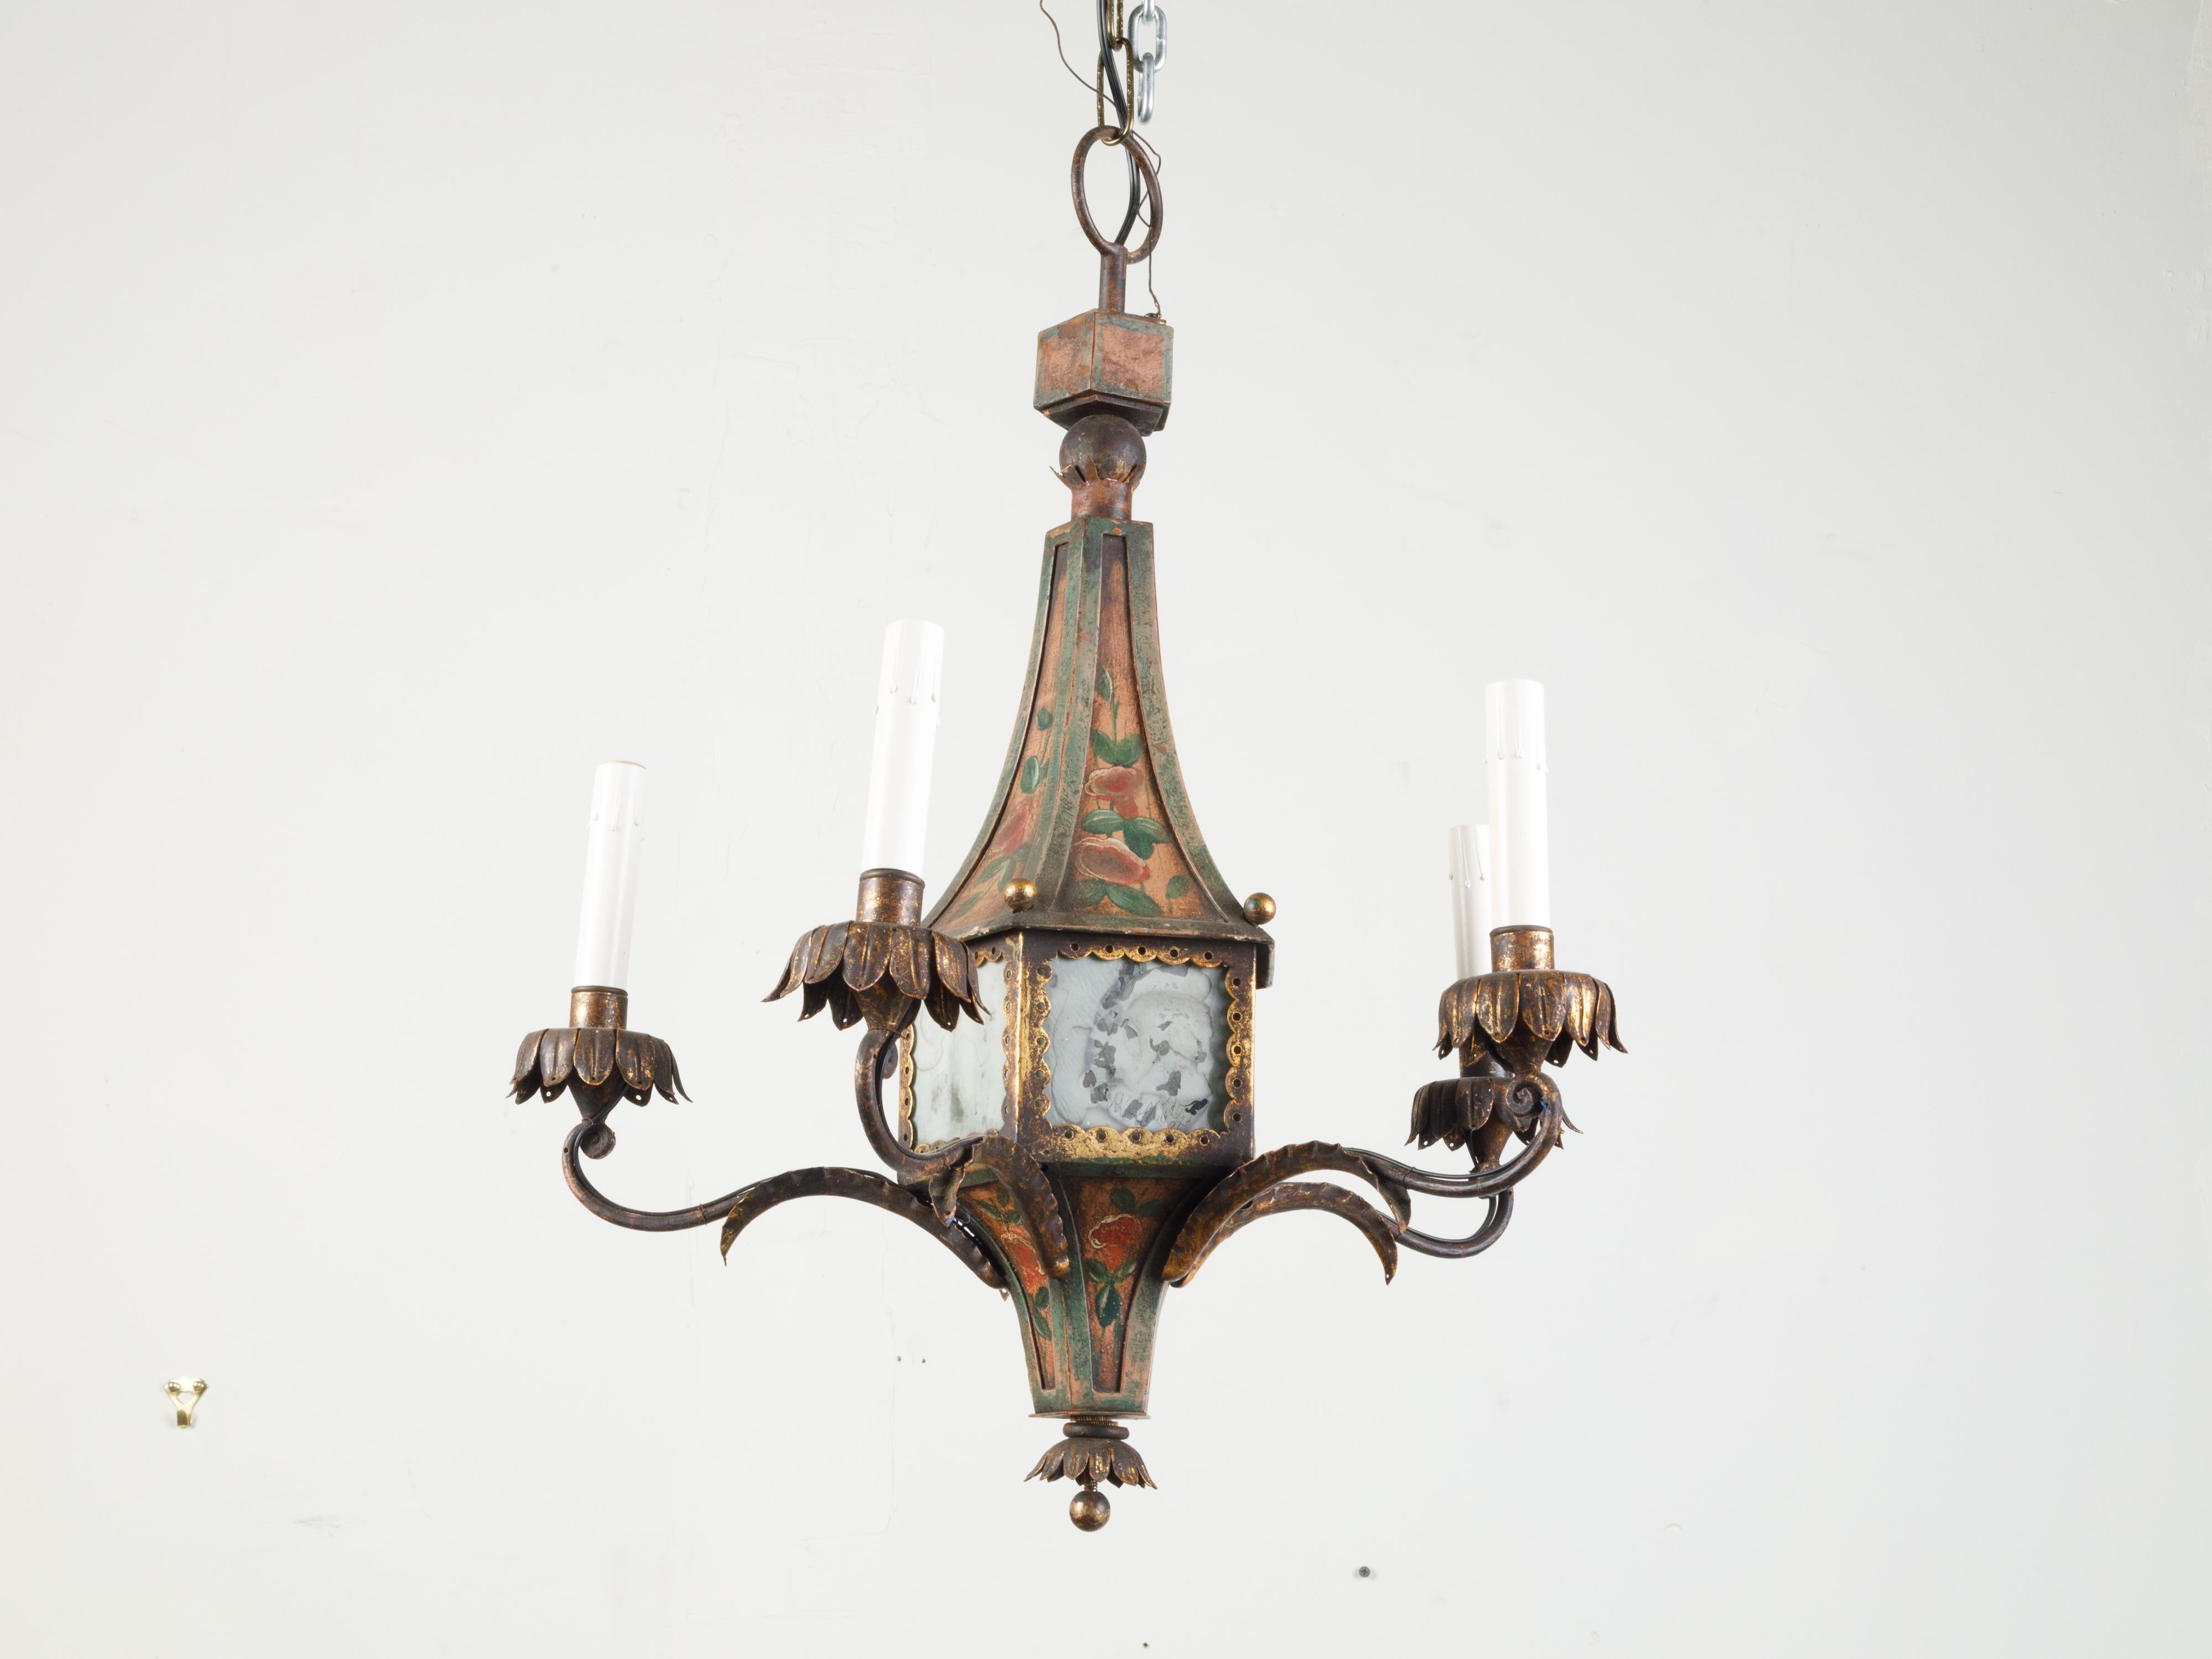 A French five-light tôle chandelier from the 19th century, with painted floral décor. We currently have two chandeliers available, priced and sold $3,750 each. Created in France during the 19th century, this chandelier features a tôle structure